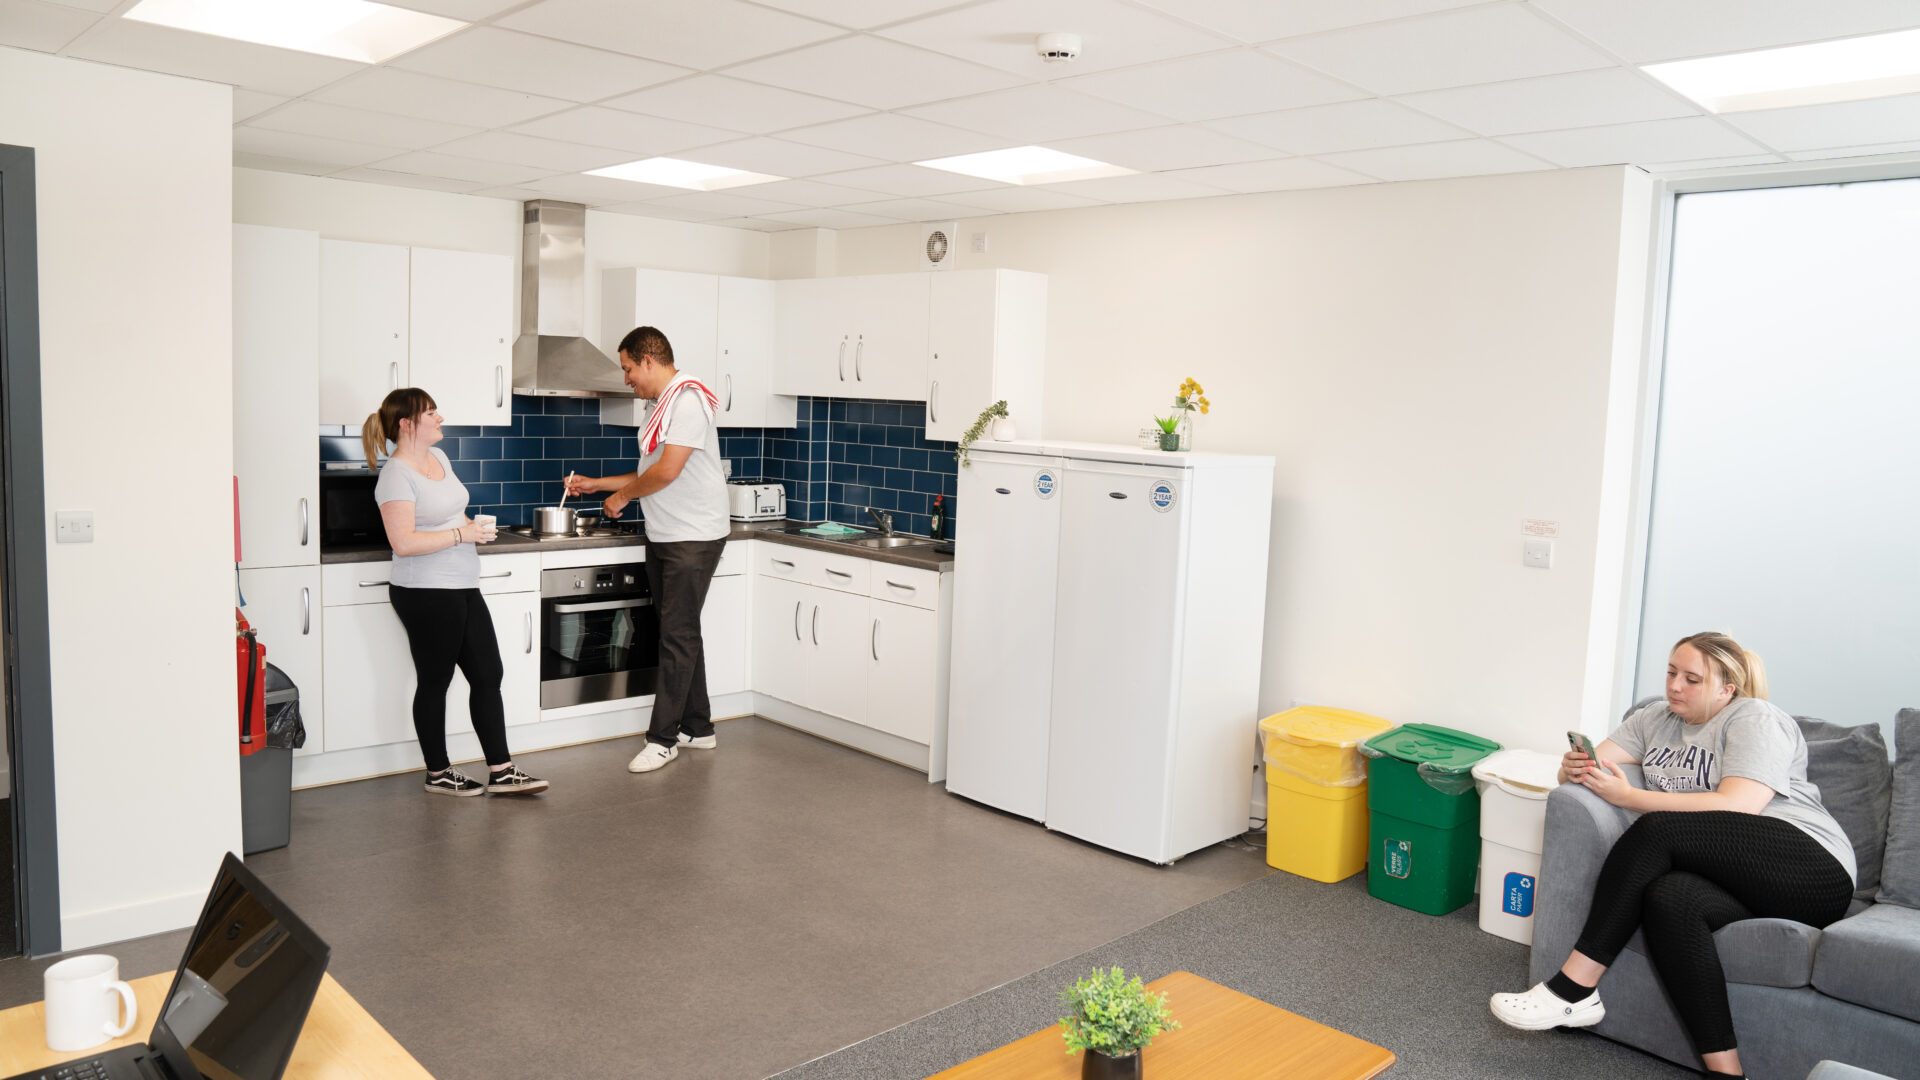 Students in the shared kitchen of Cofton Hall